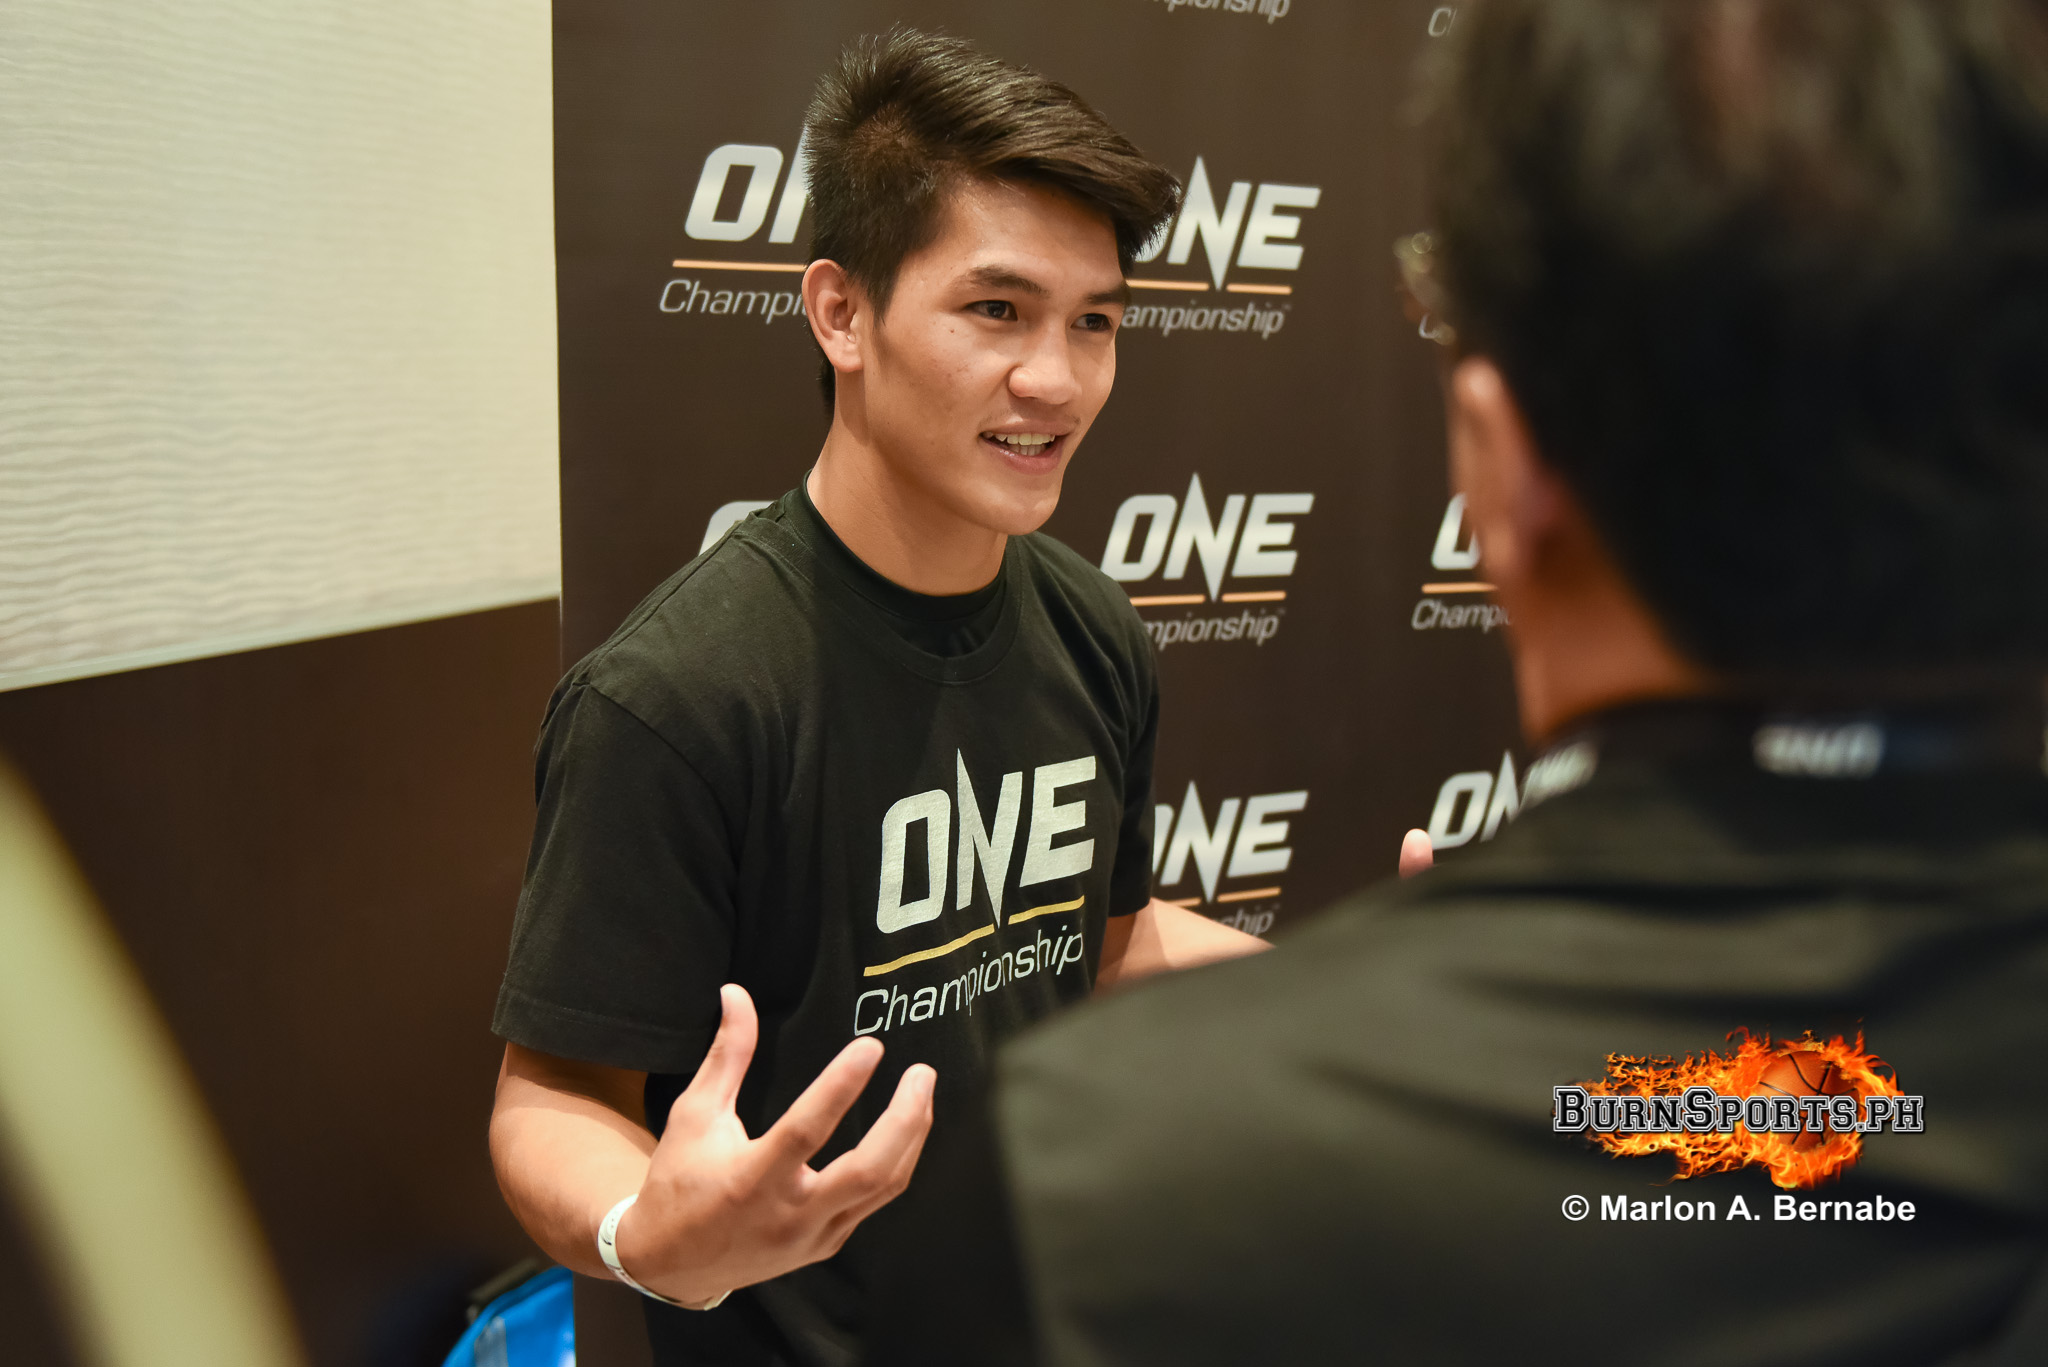 Danny Kingad sees Grand Prix as path back to ONE title shot